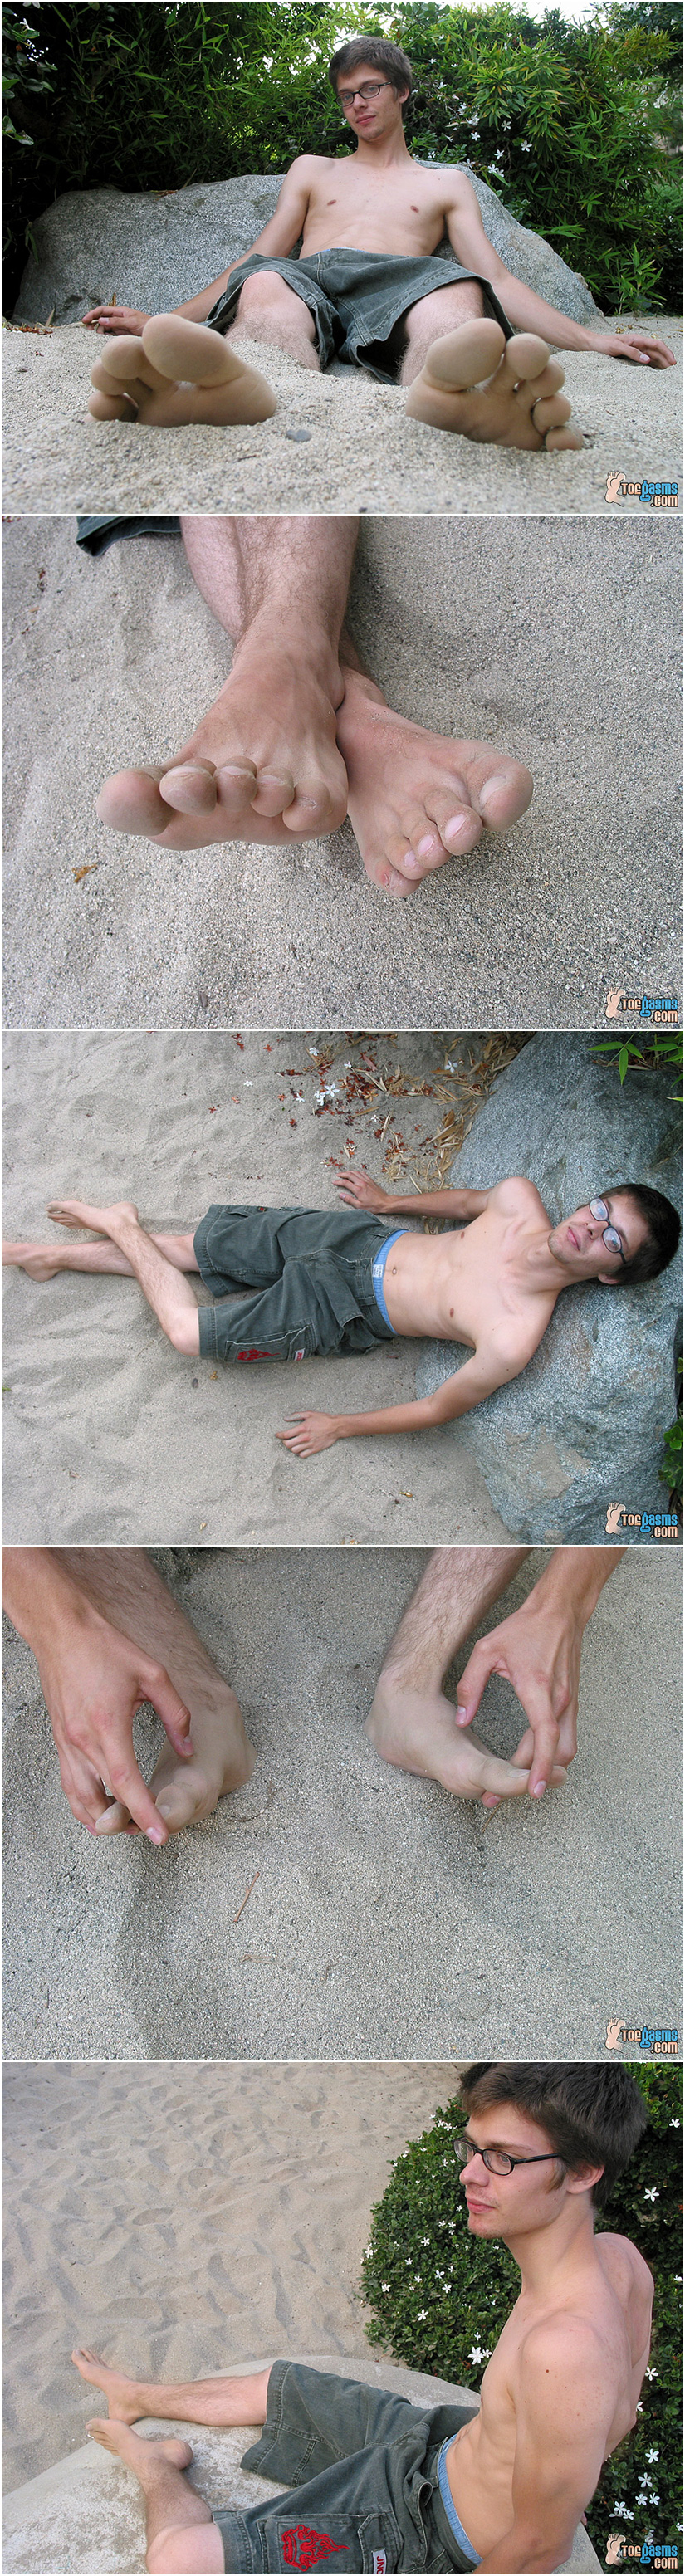 Smooth chested twink with sandy bare feet